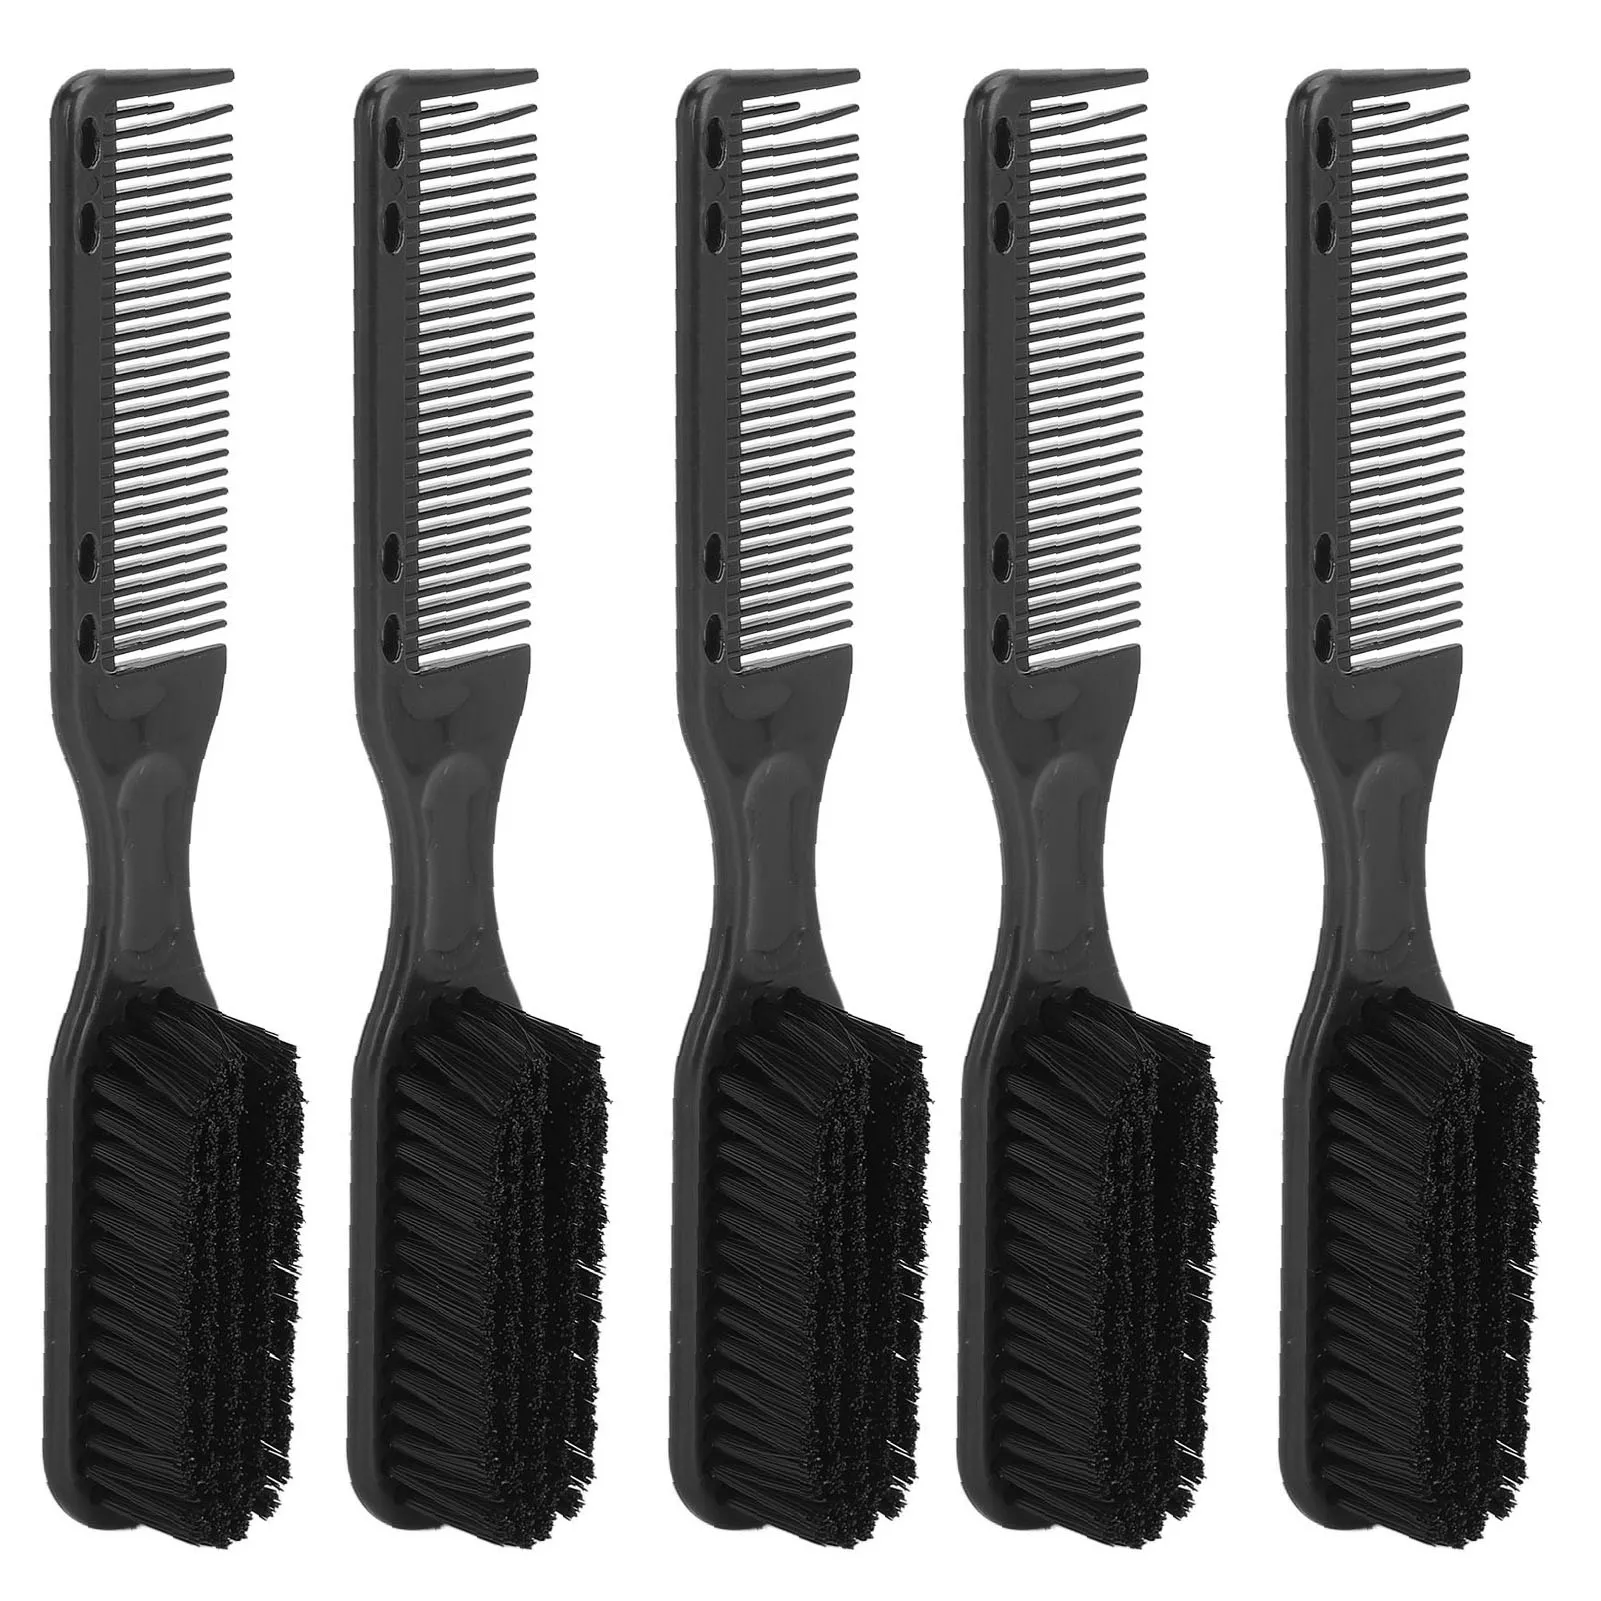 

Oil Hair Styling Brush Men Hair Beard Comb Easy To Hold Ergonomic Handle Portable Dual Head Lightweight for Hair Salons